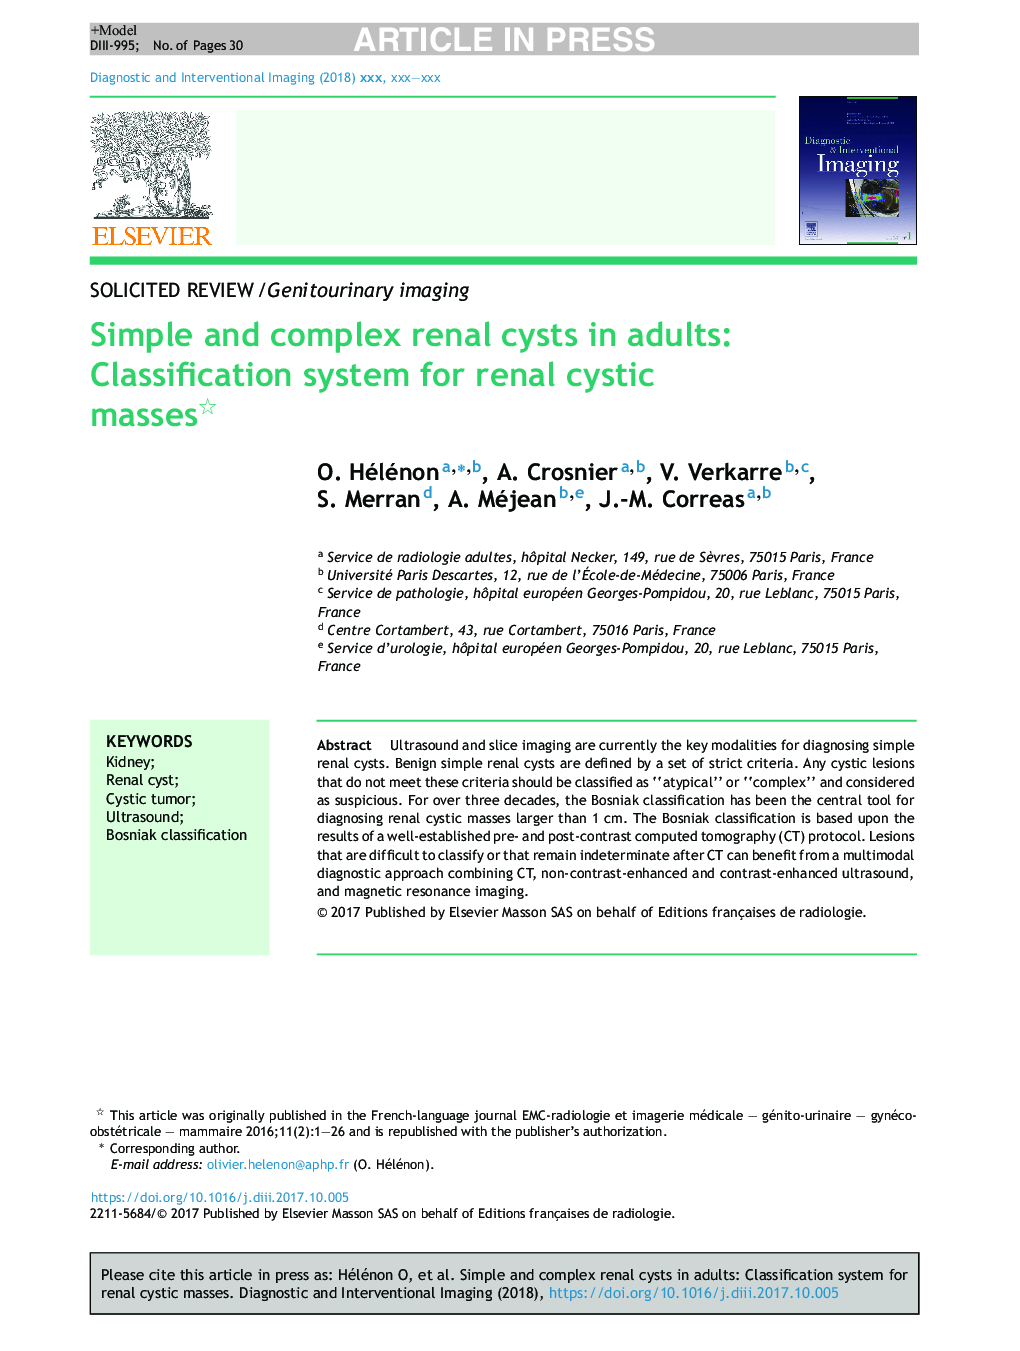 Simple and complex renal cysts in adults: Classification system for renal cystic masses